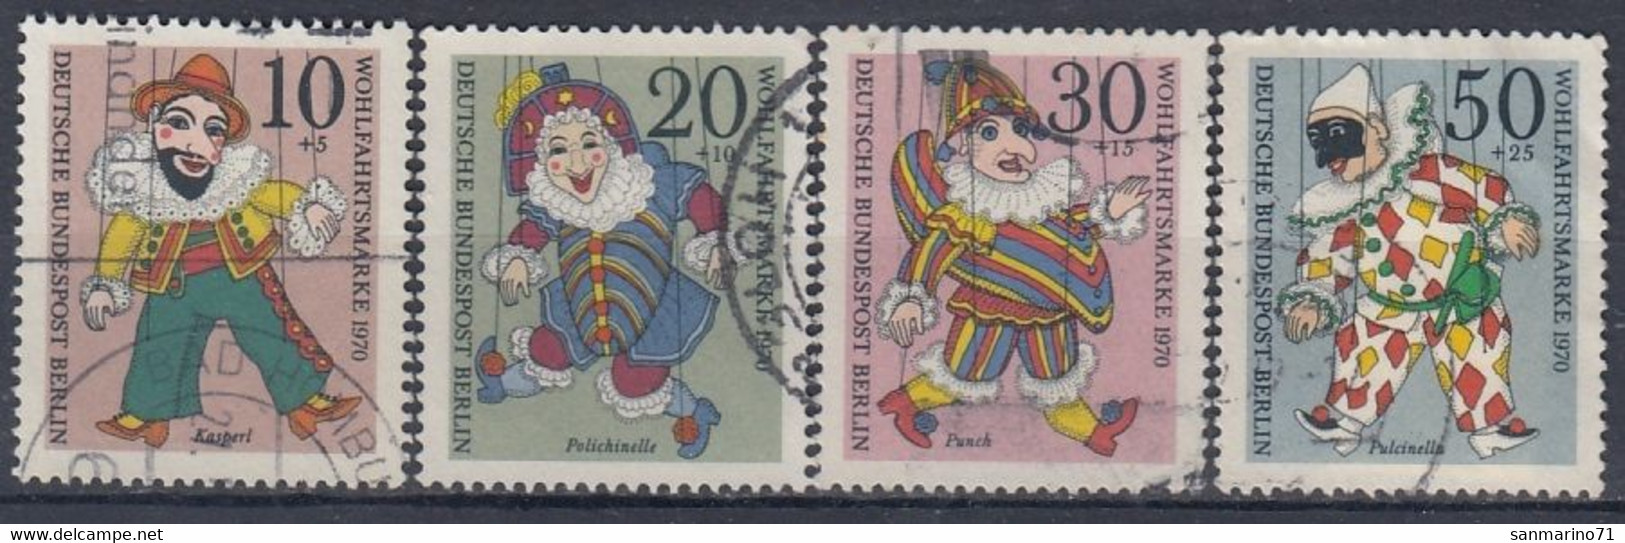 GERMANY Berlin 373-376,used - Marionette